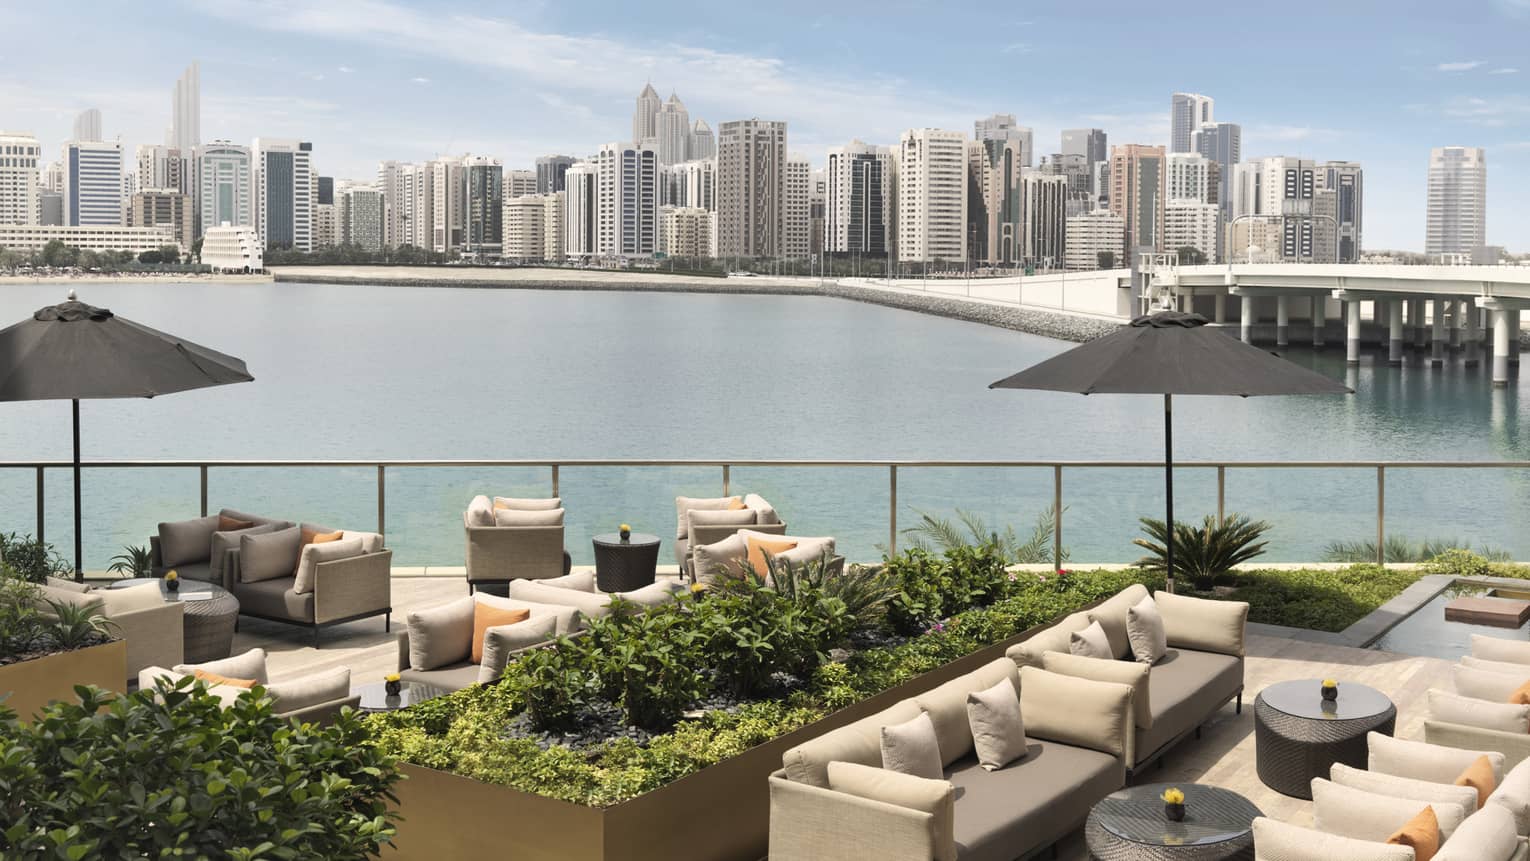 Outdoor sofas, umbrellas and planters on patio overlooking water, city